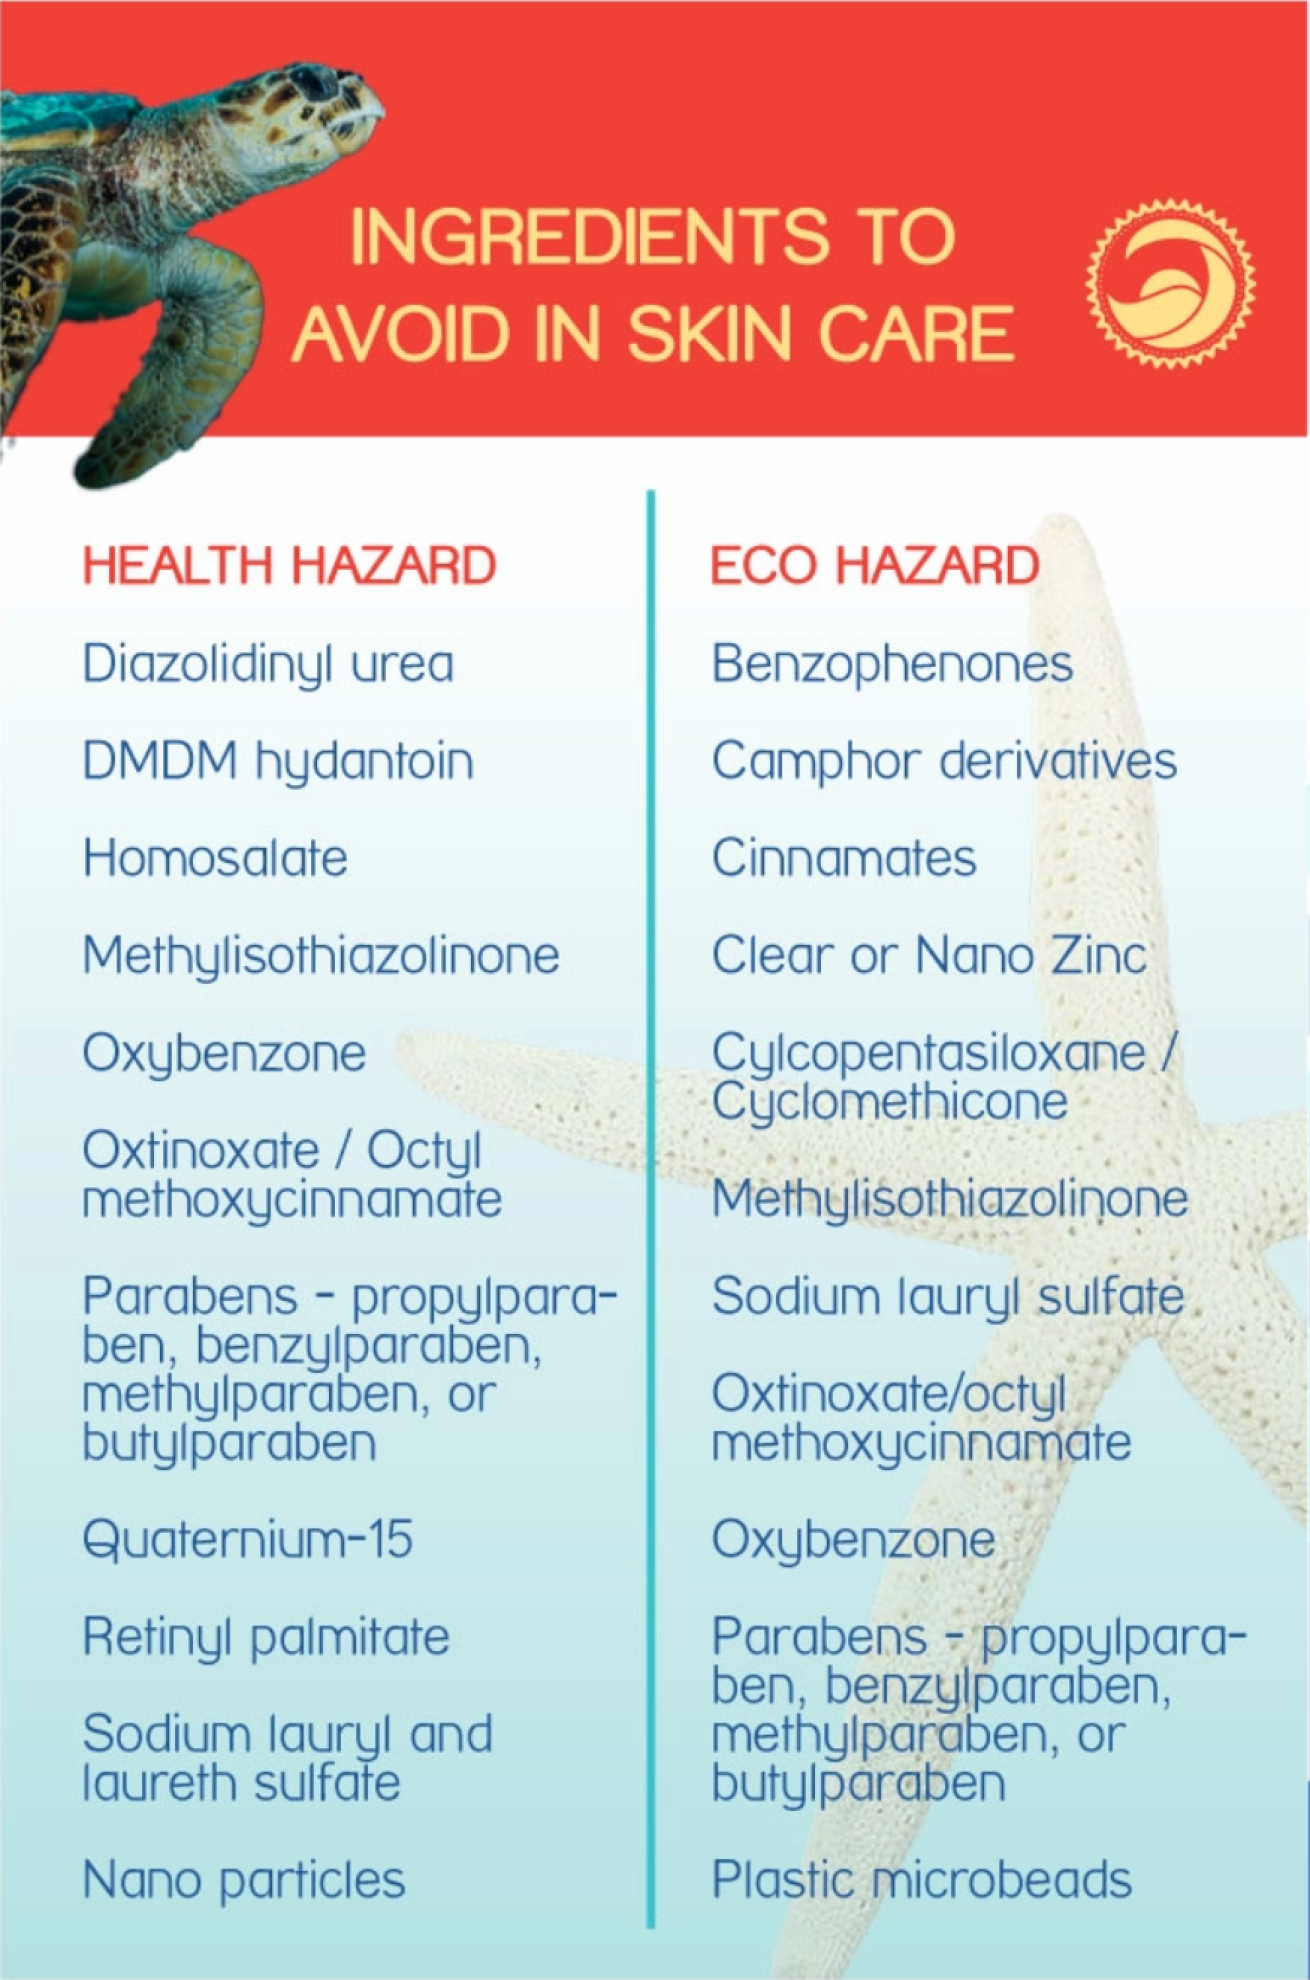 Skincare ingredients to avoid infographic